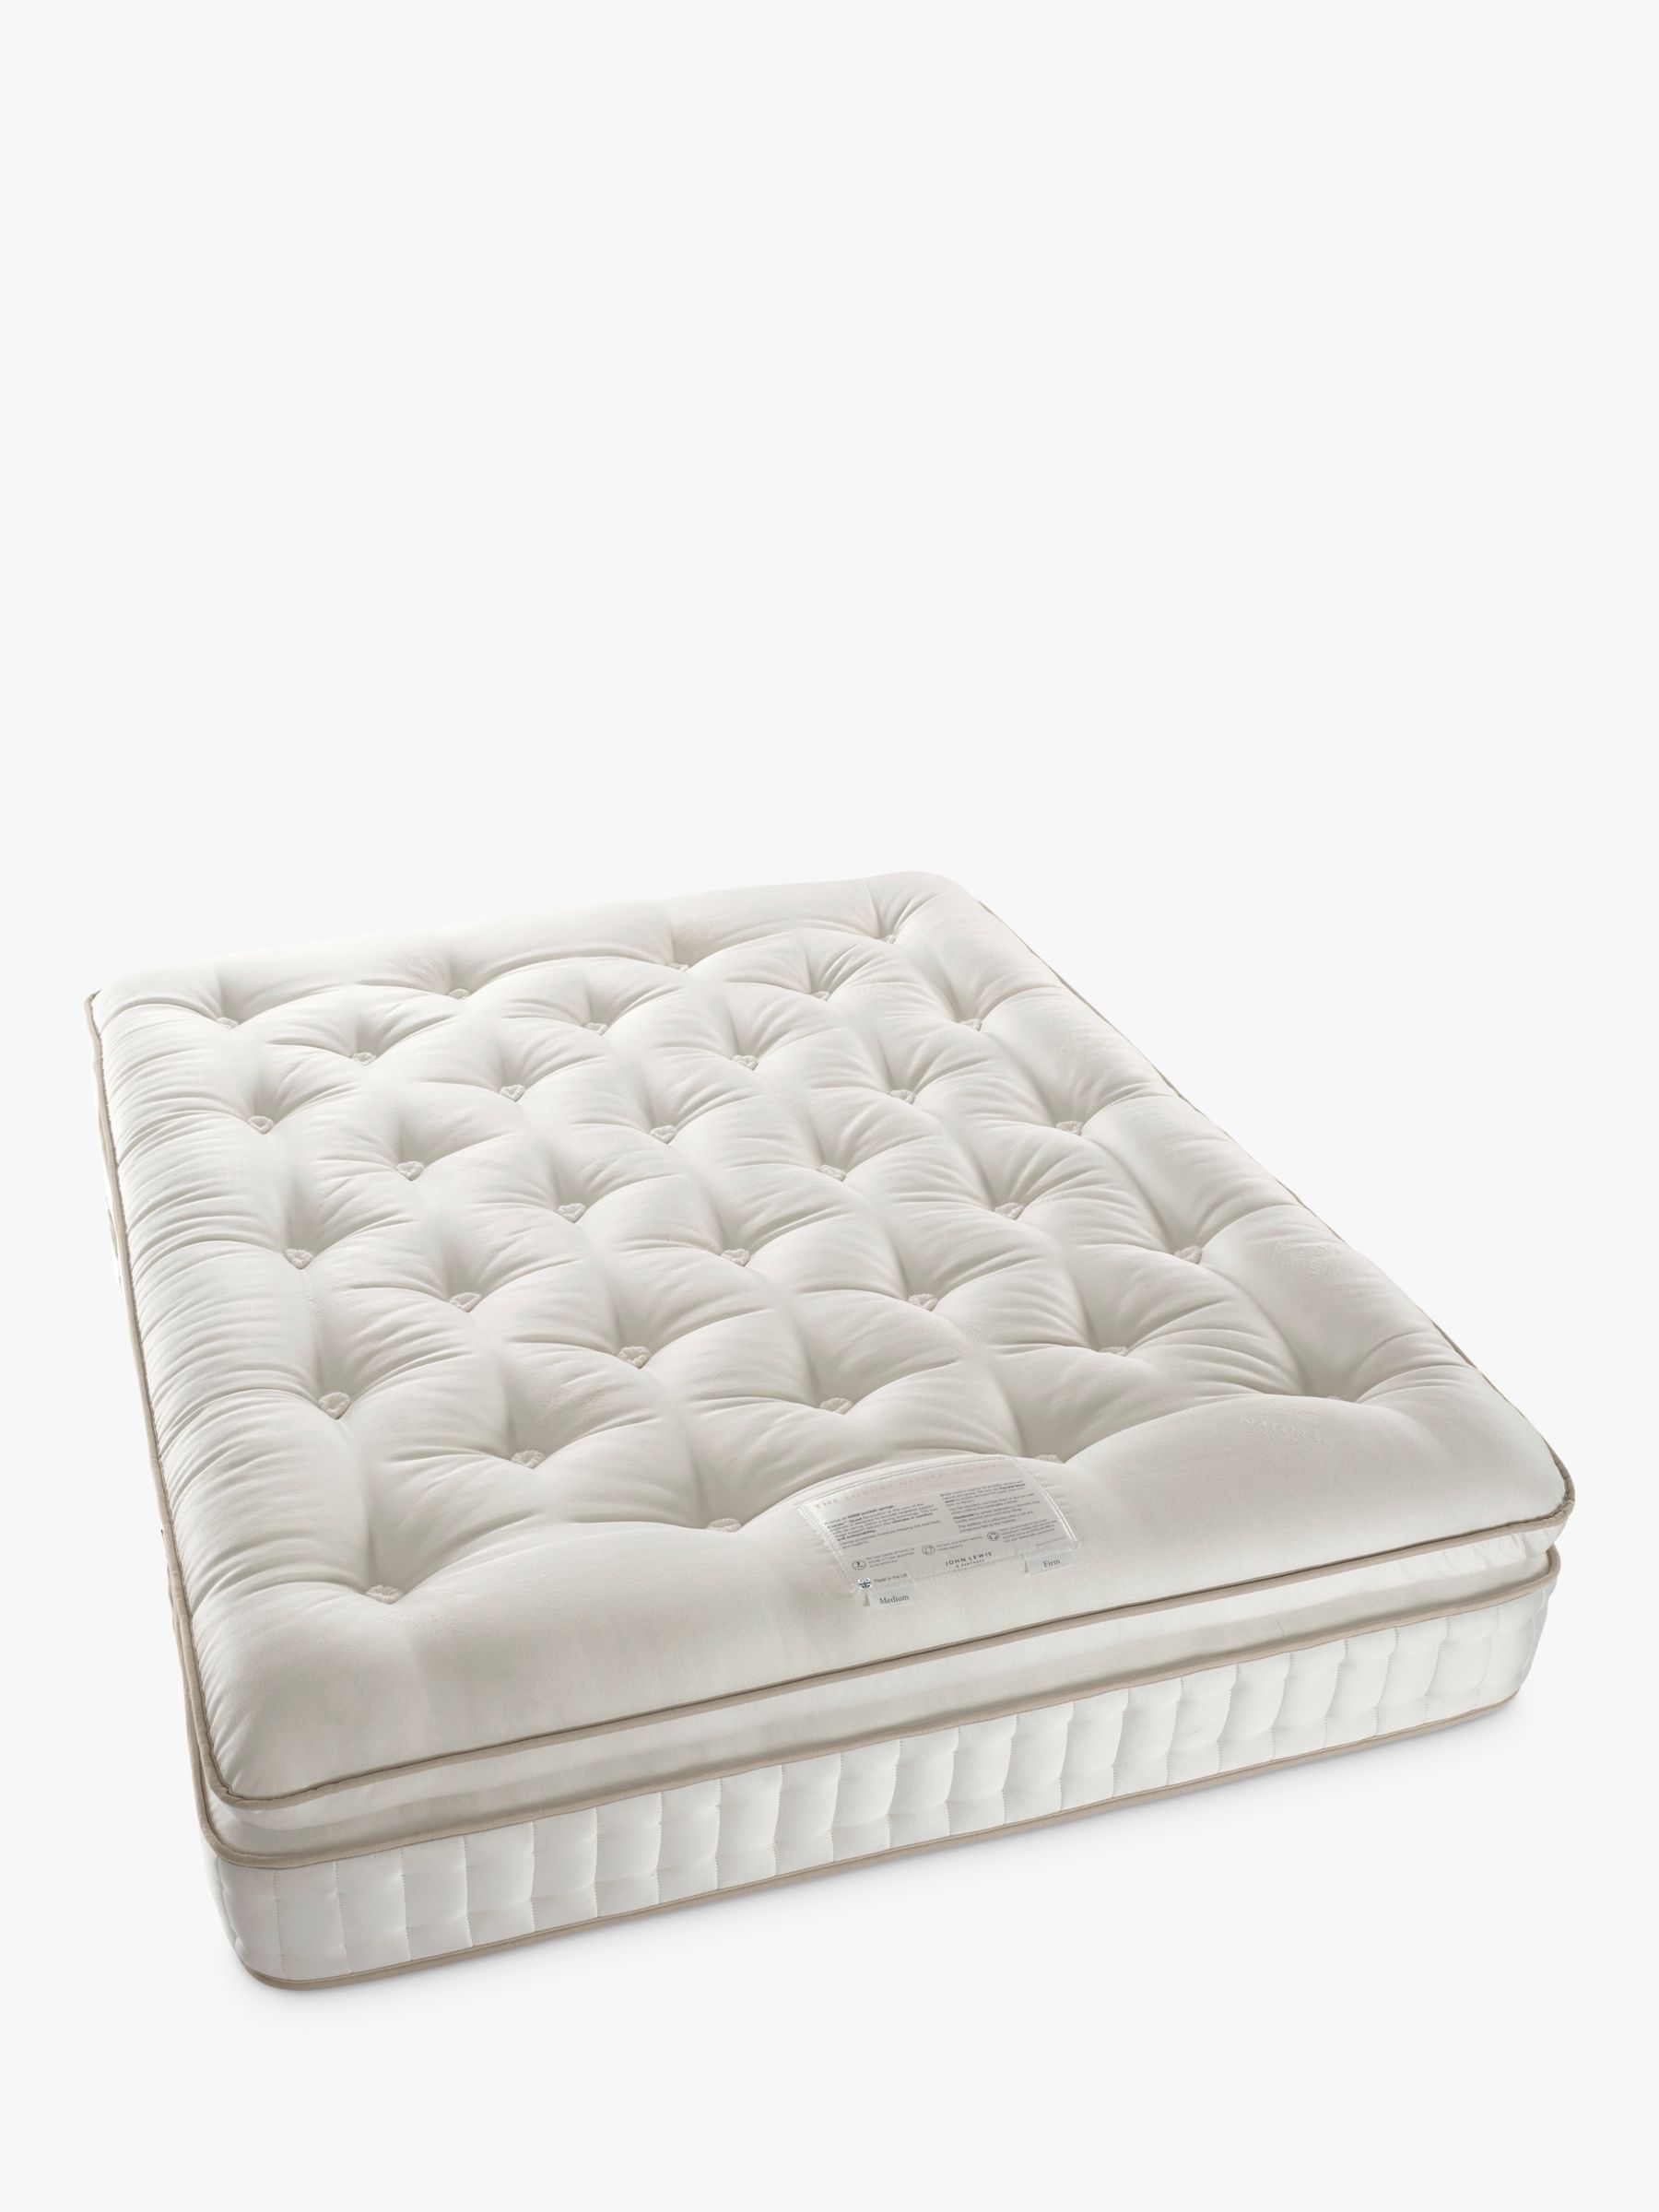 Photo of John lewis luxury natural collection british wool pillowtop 11000 super king size firmer tension pocket spring mattress